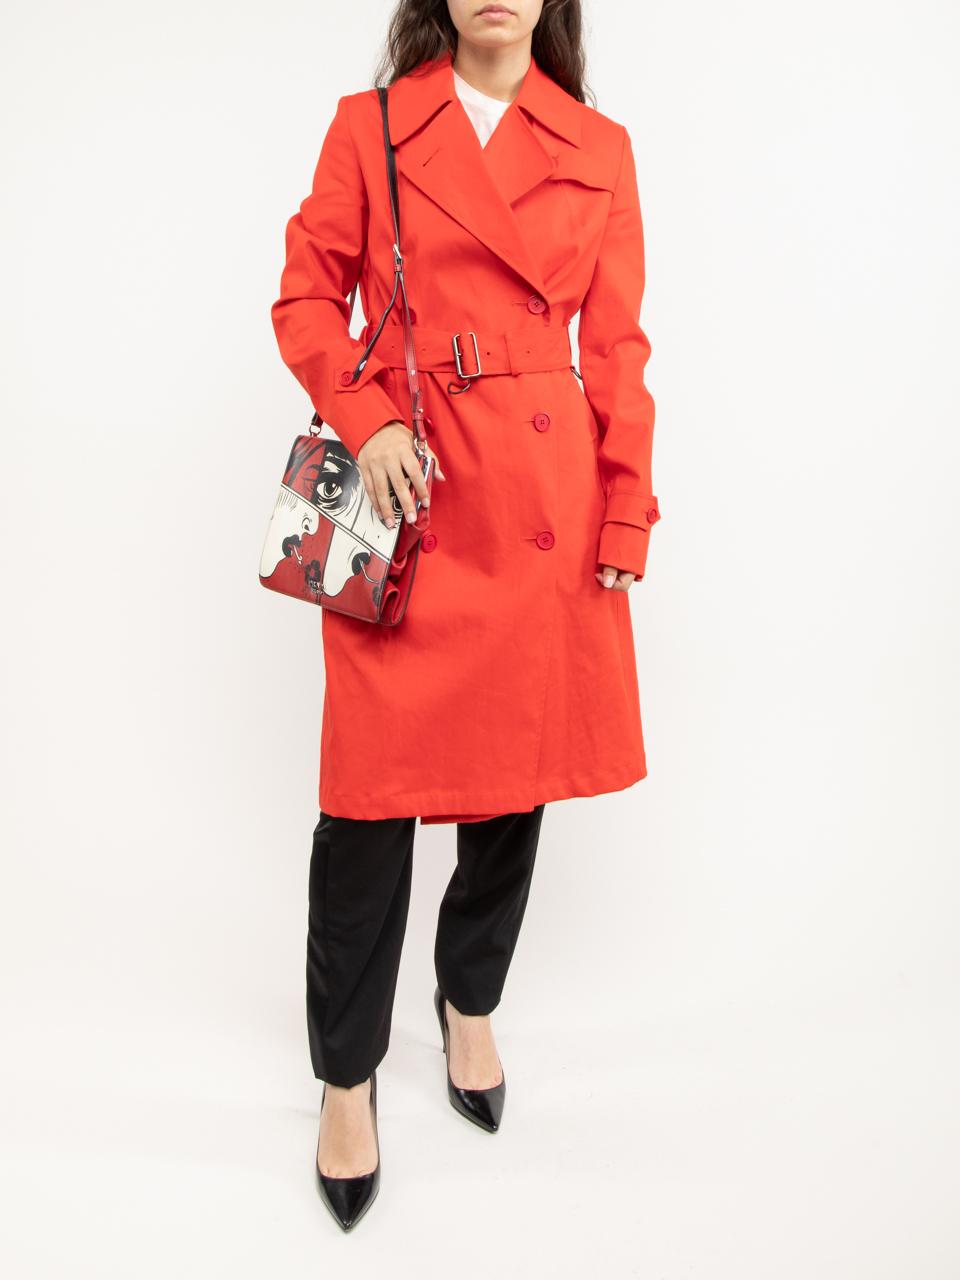 Pre-Loved Burberry Women's Vintage Trench Belted Coat For Sale at 1stDibs